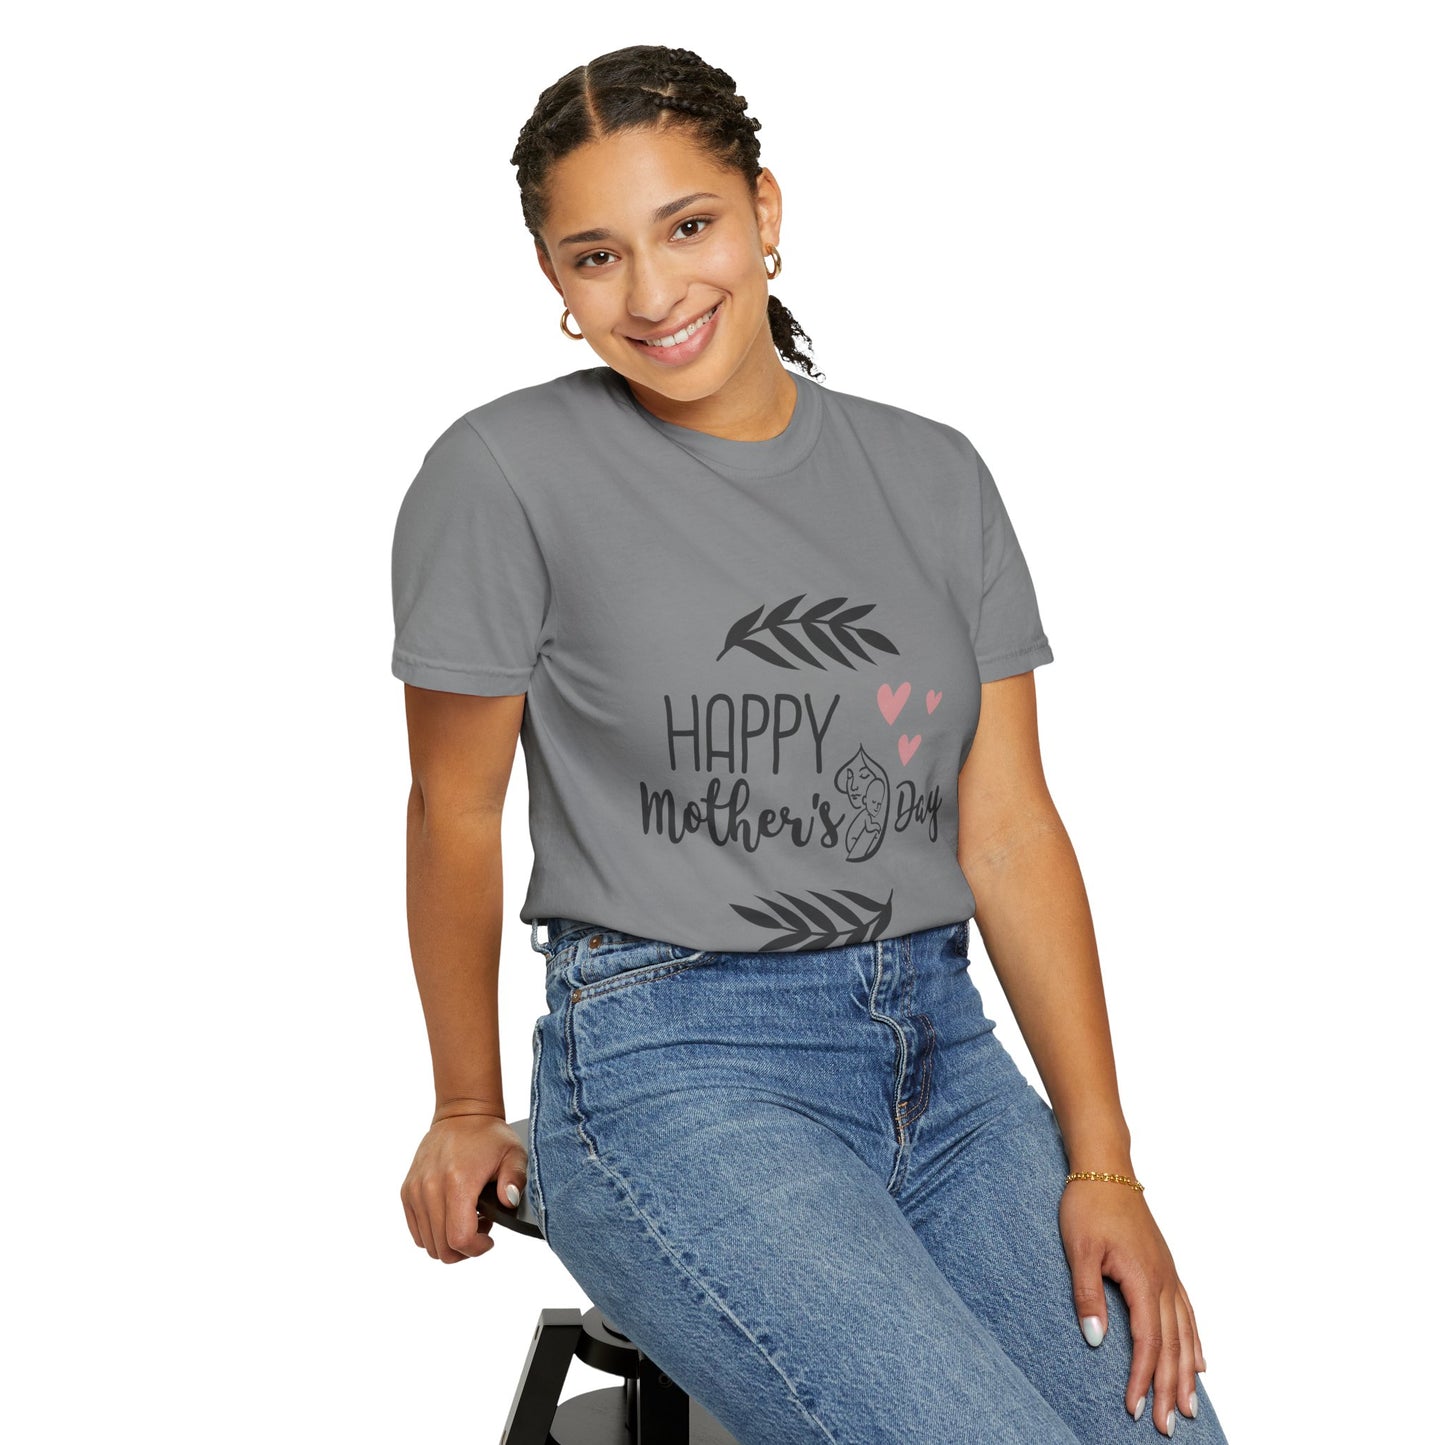 Happy Mother's Day - Unisex Garment-Dyed T-shirt